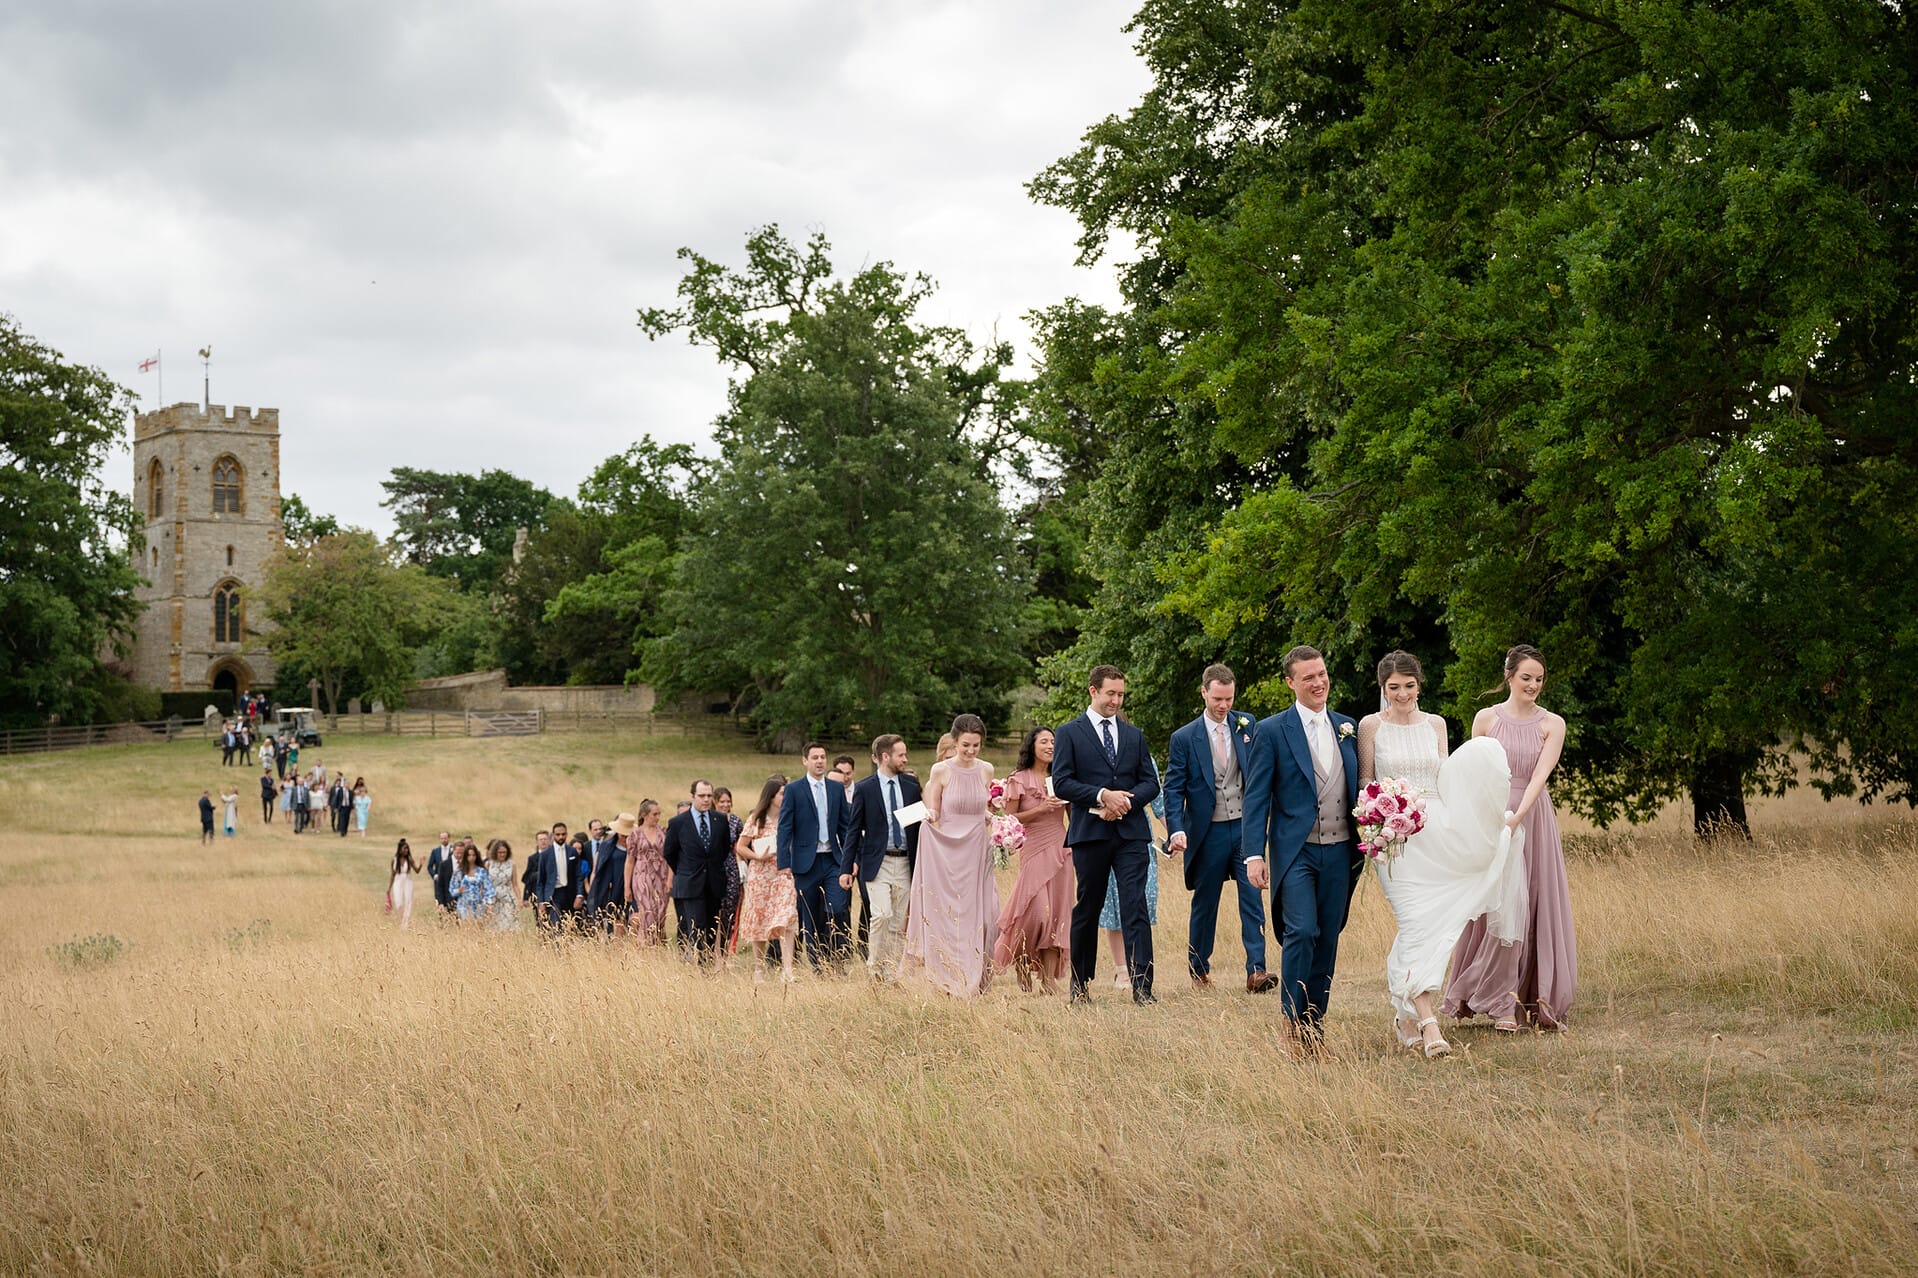 Bride and groom leading their wedding guests from the church through a field of long grass